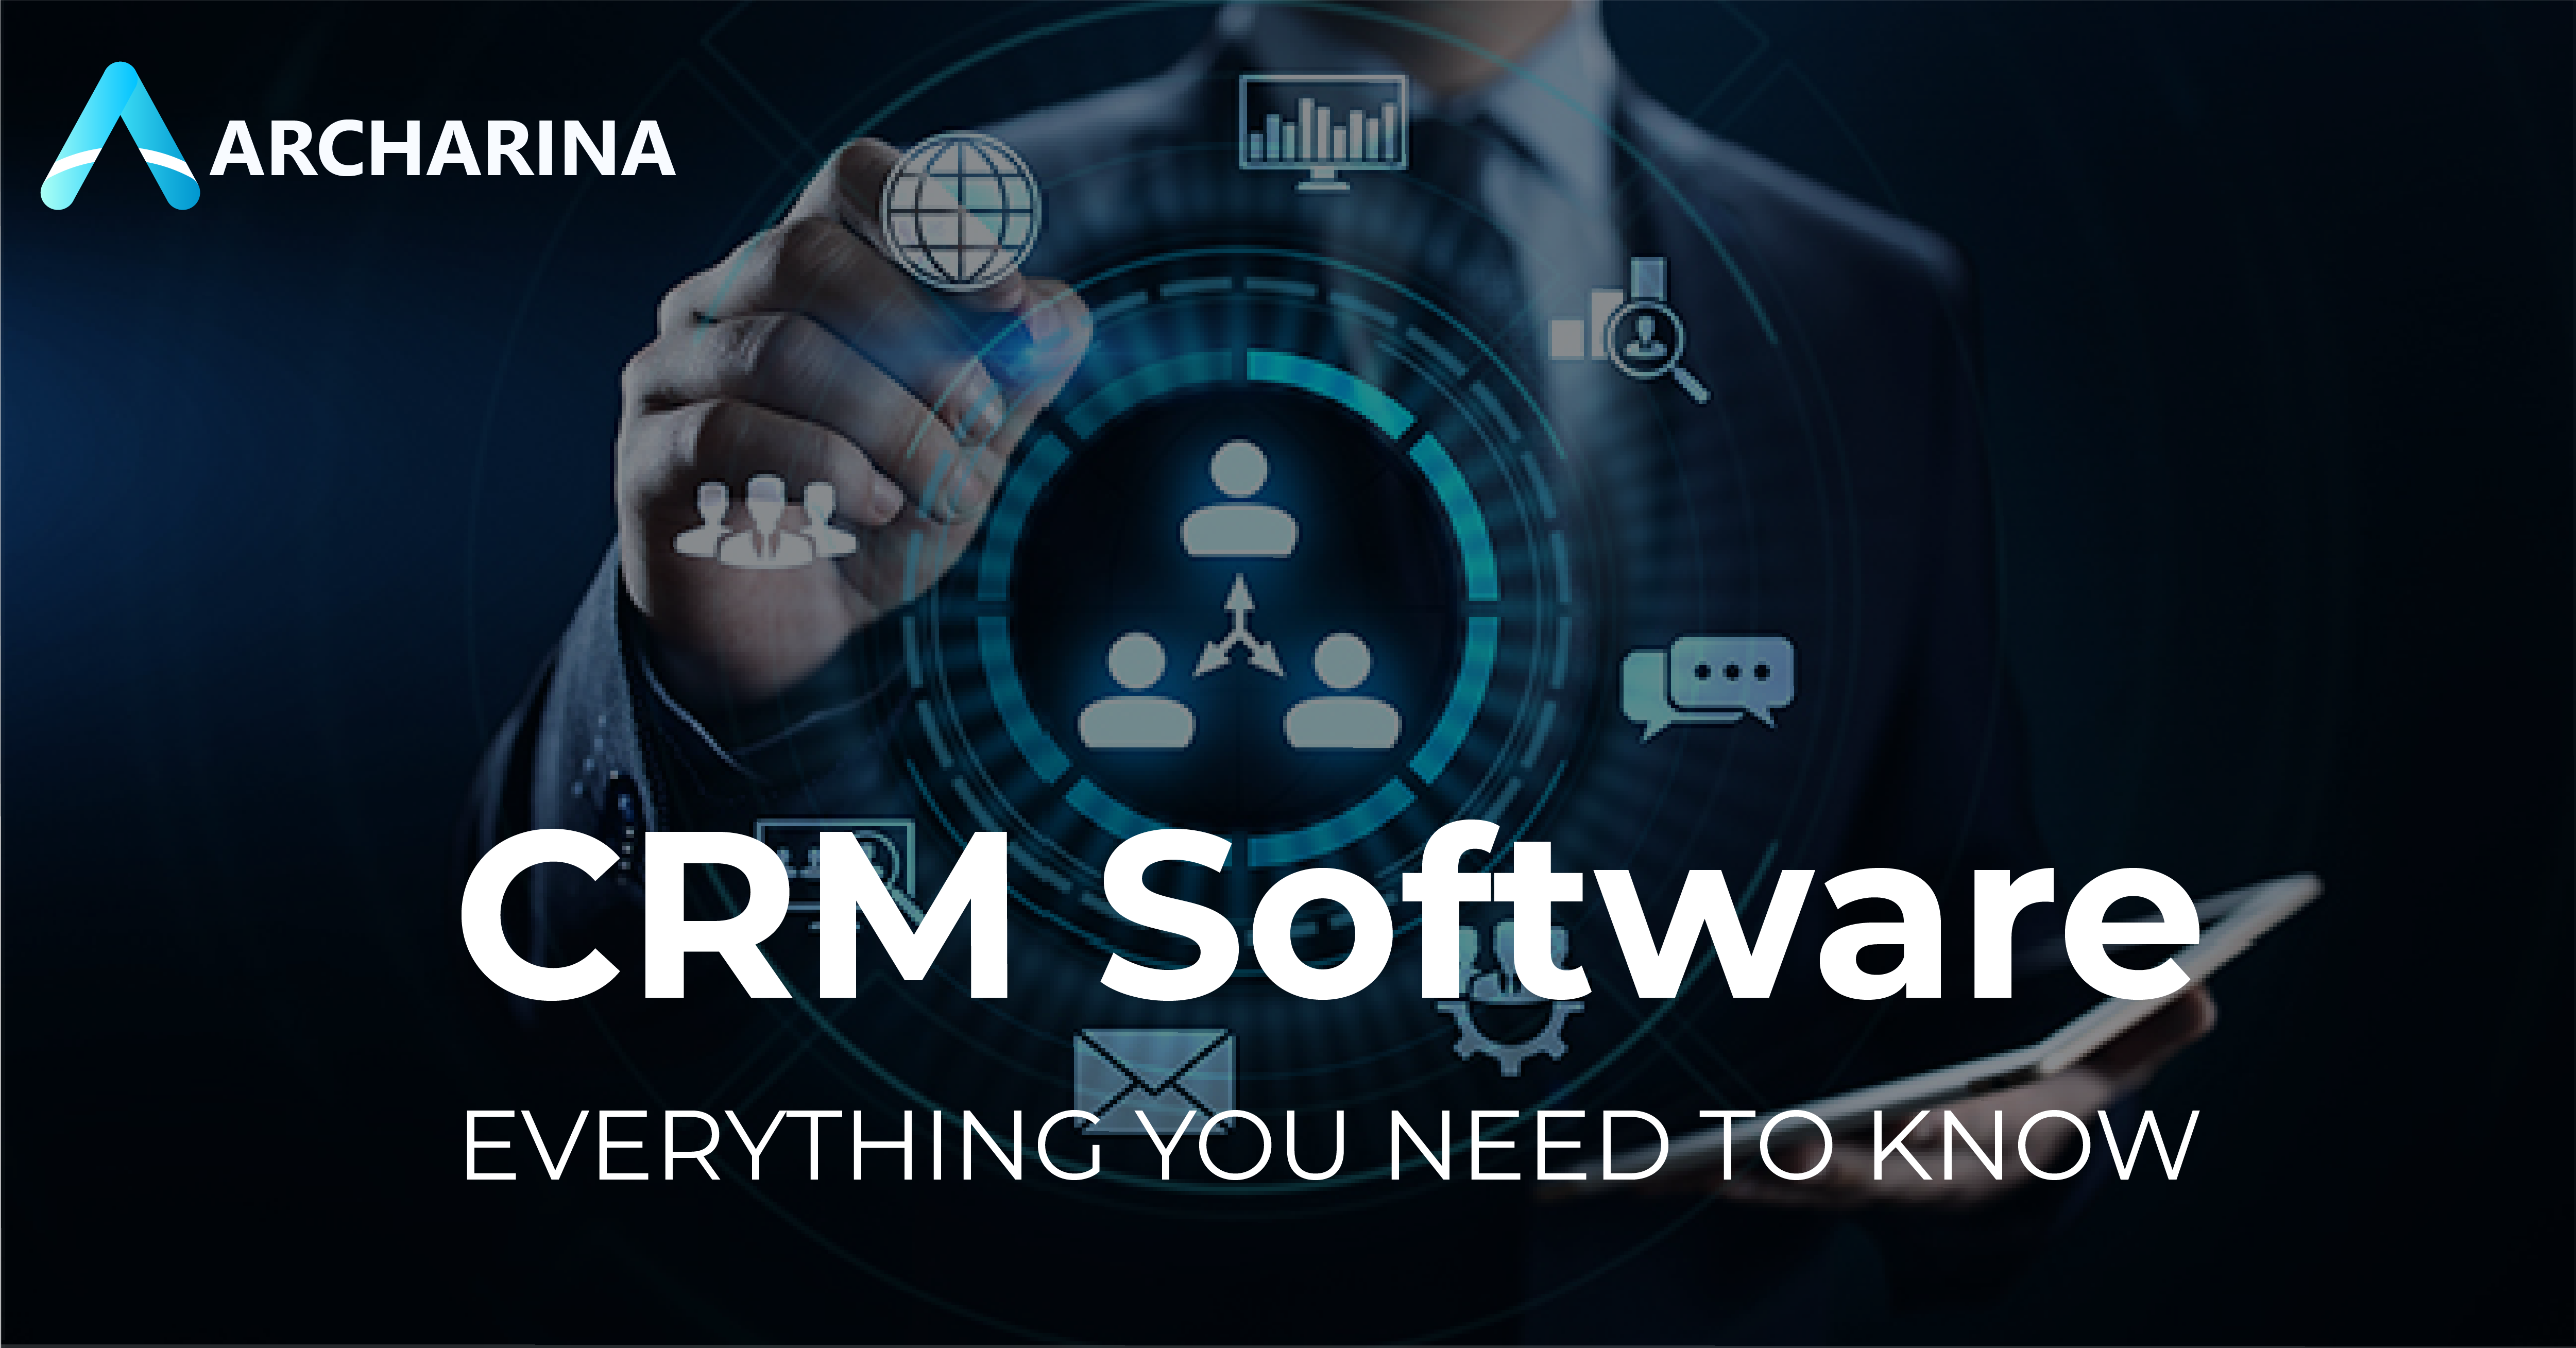 CRM Software Everything You Need to Know